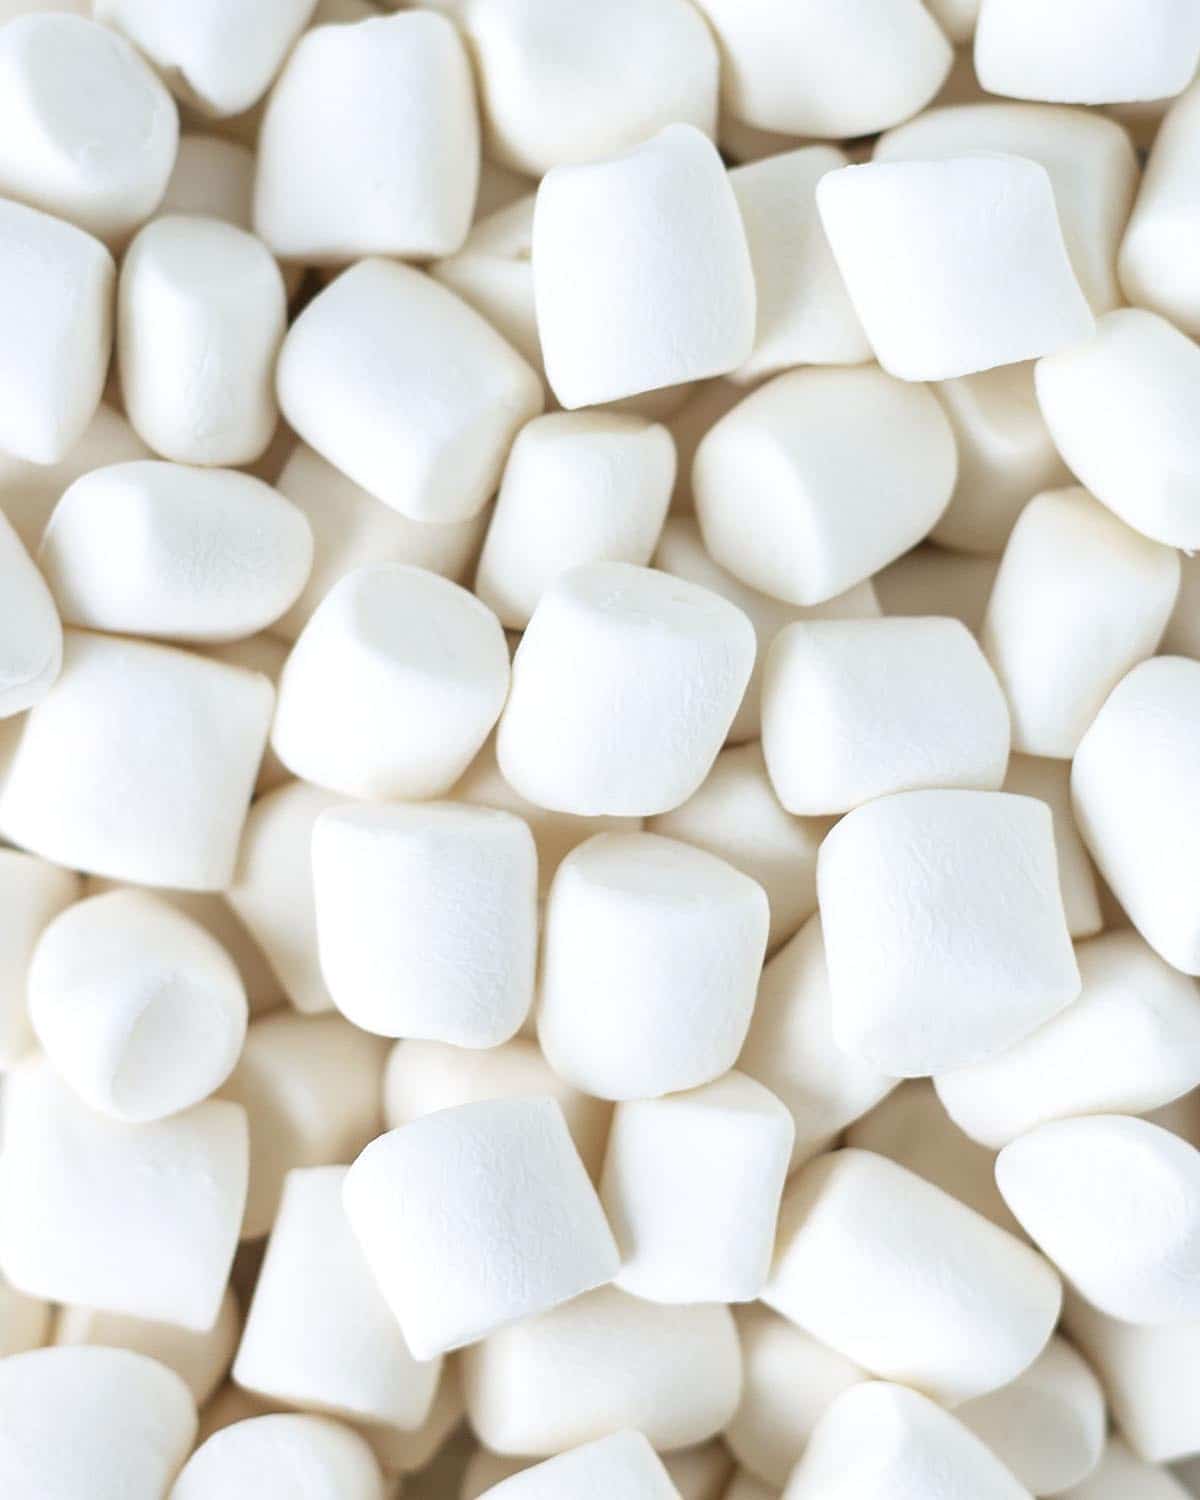 A close up shot of a pile of marshmallows.